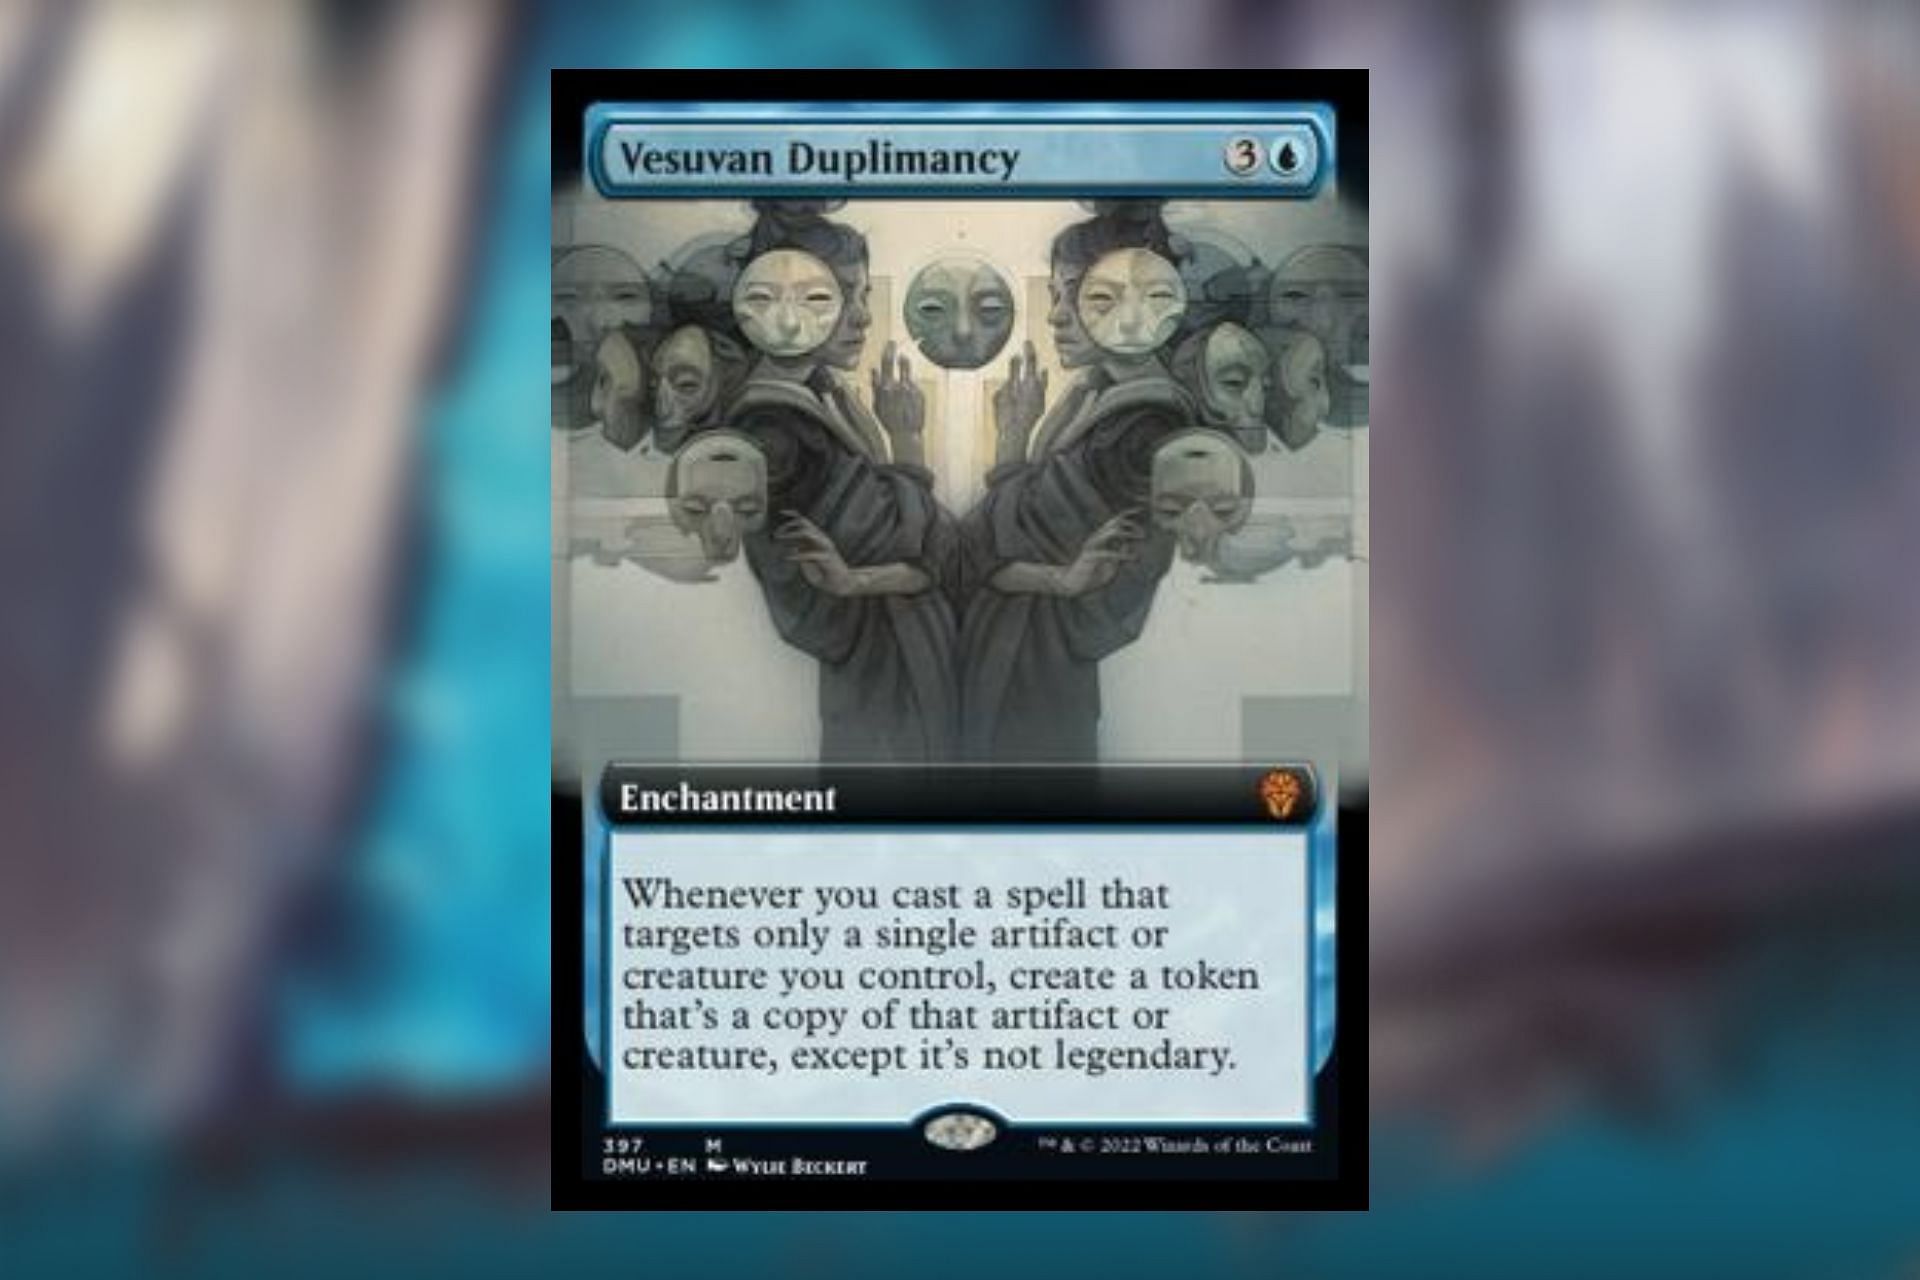 Vesuvian Duplimancy might be too slow for Magic: The Gathering